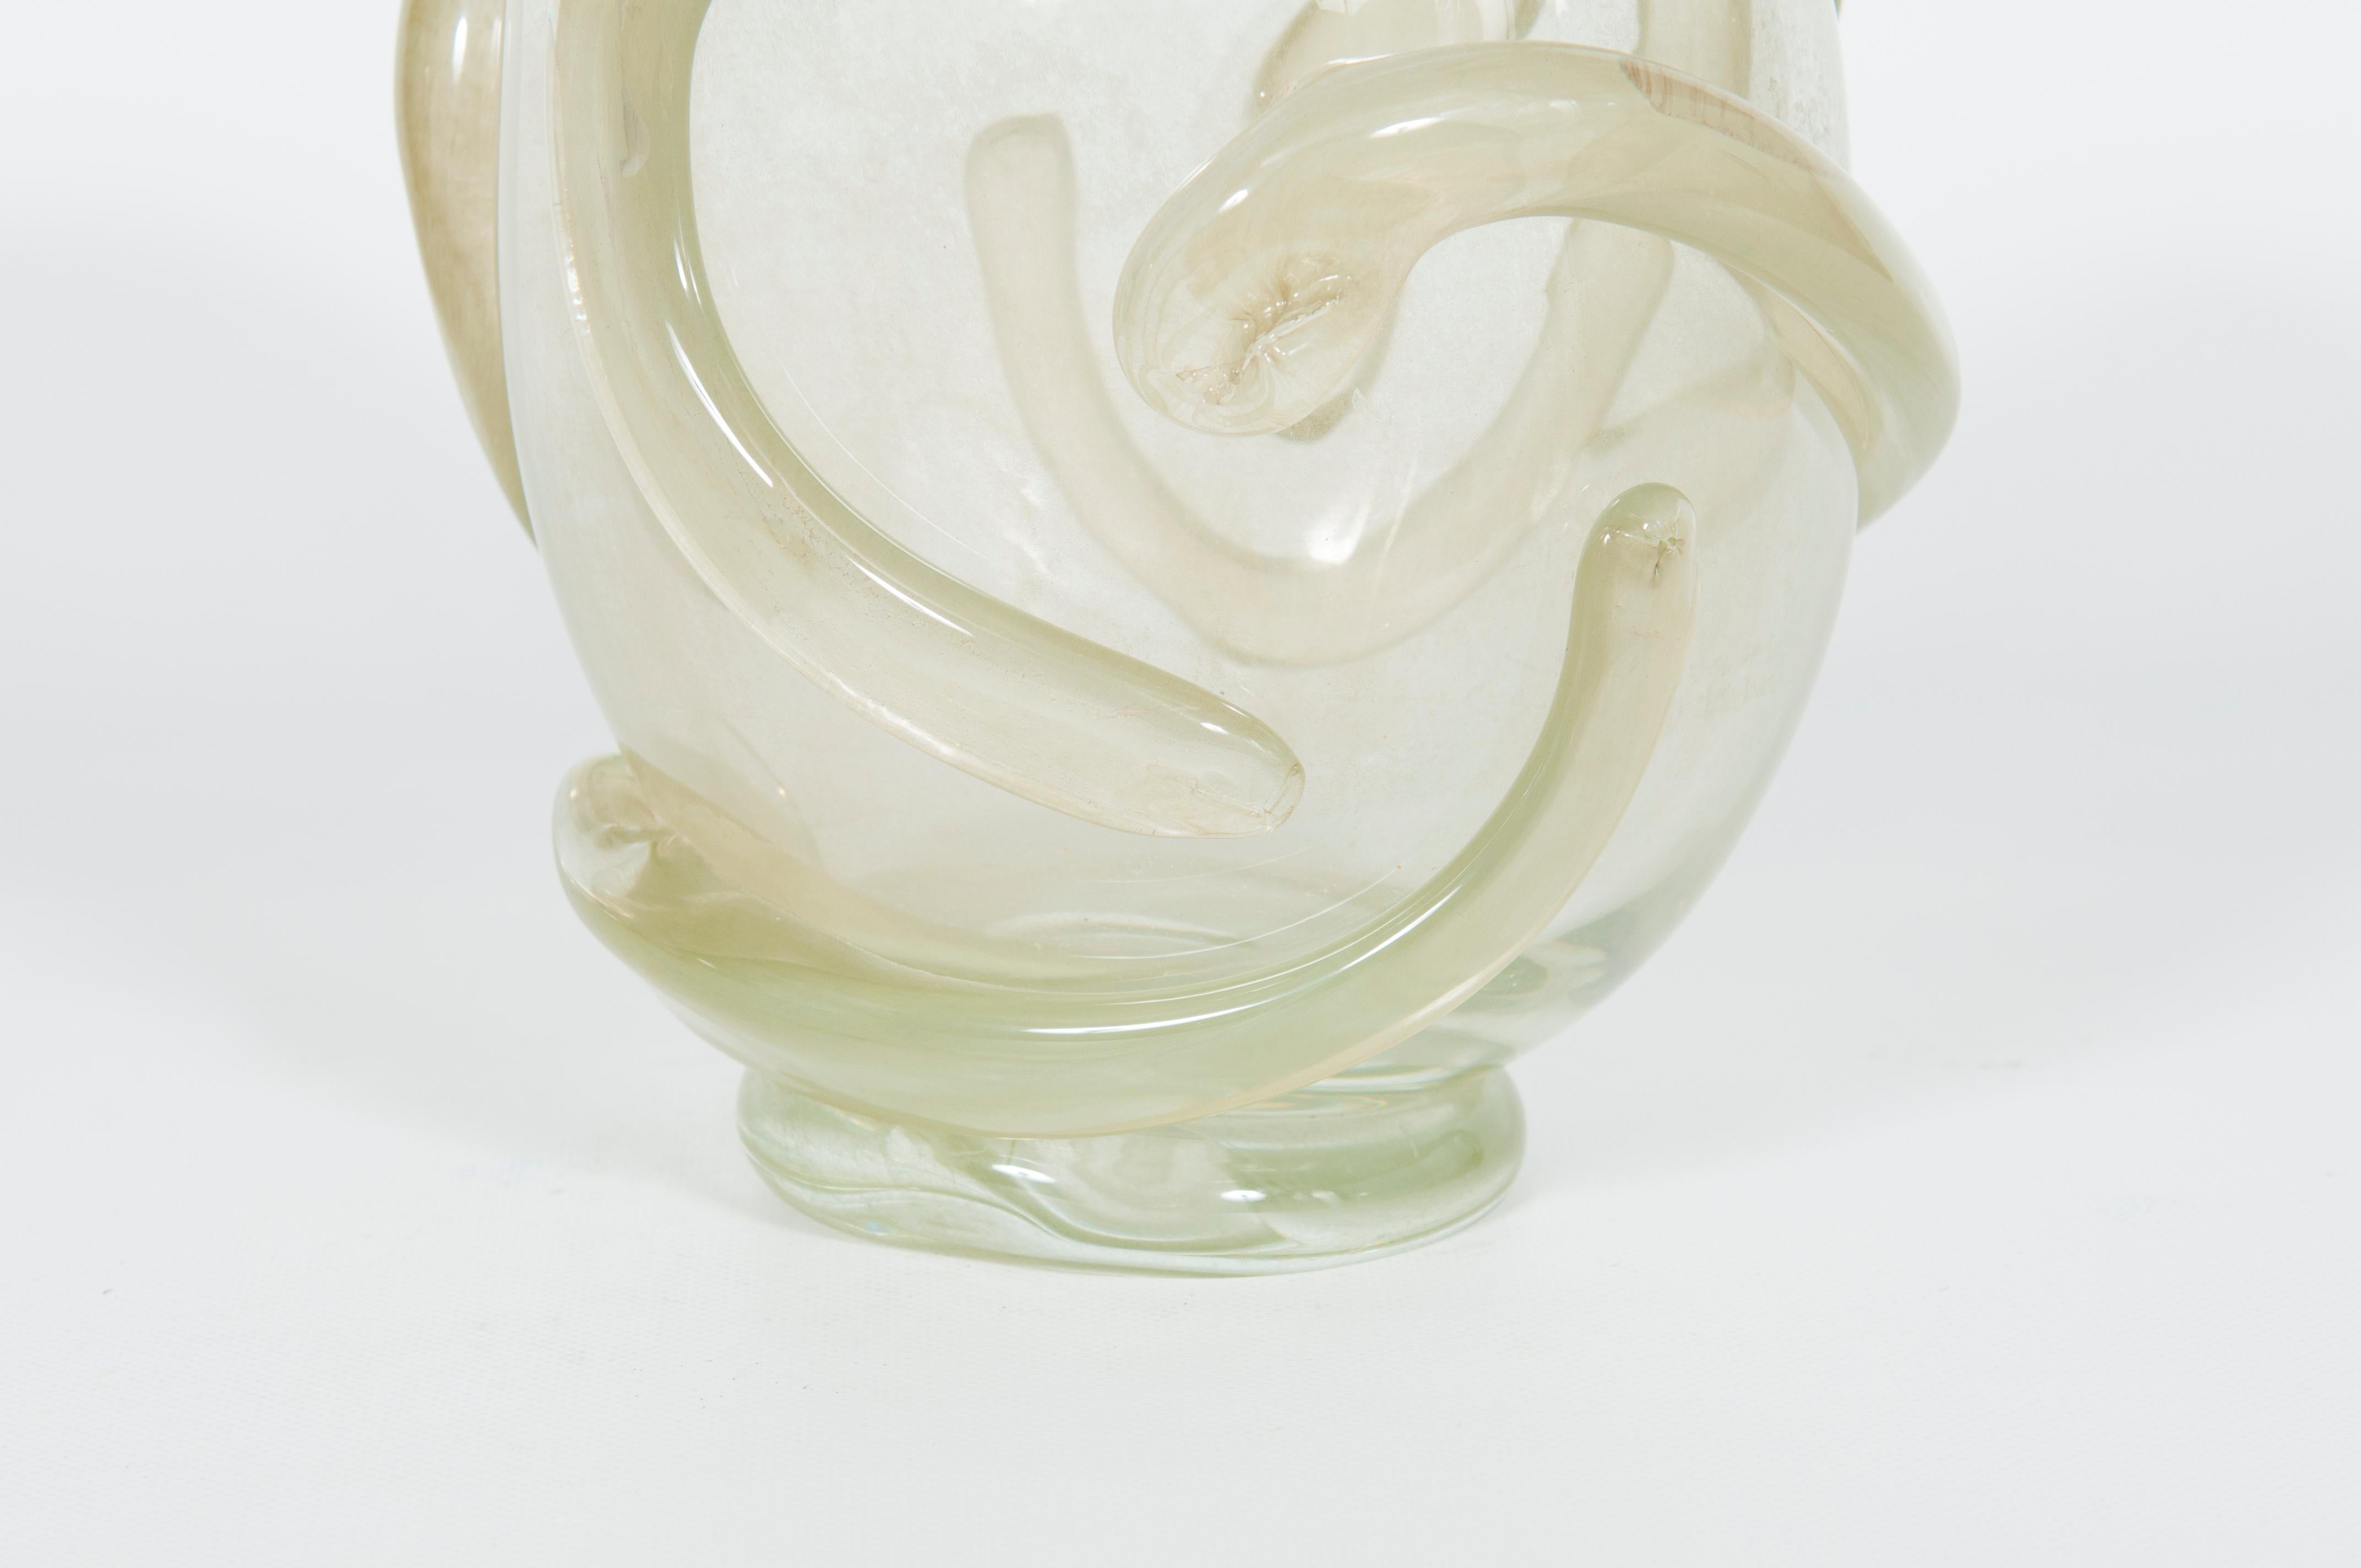 Late 20th Century Italian Vase in Blown Murano Glass Antiqued Clear Color Attributed to Salviati